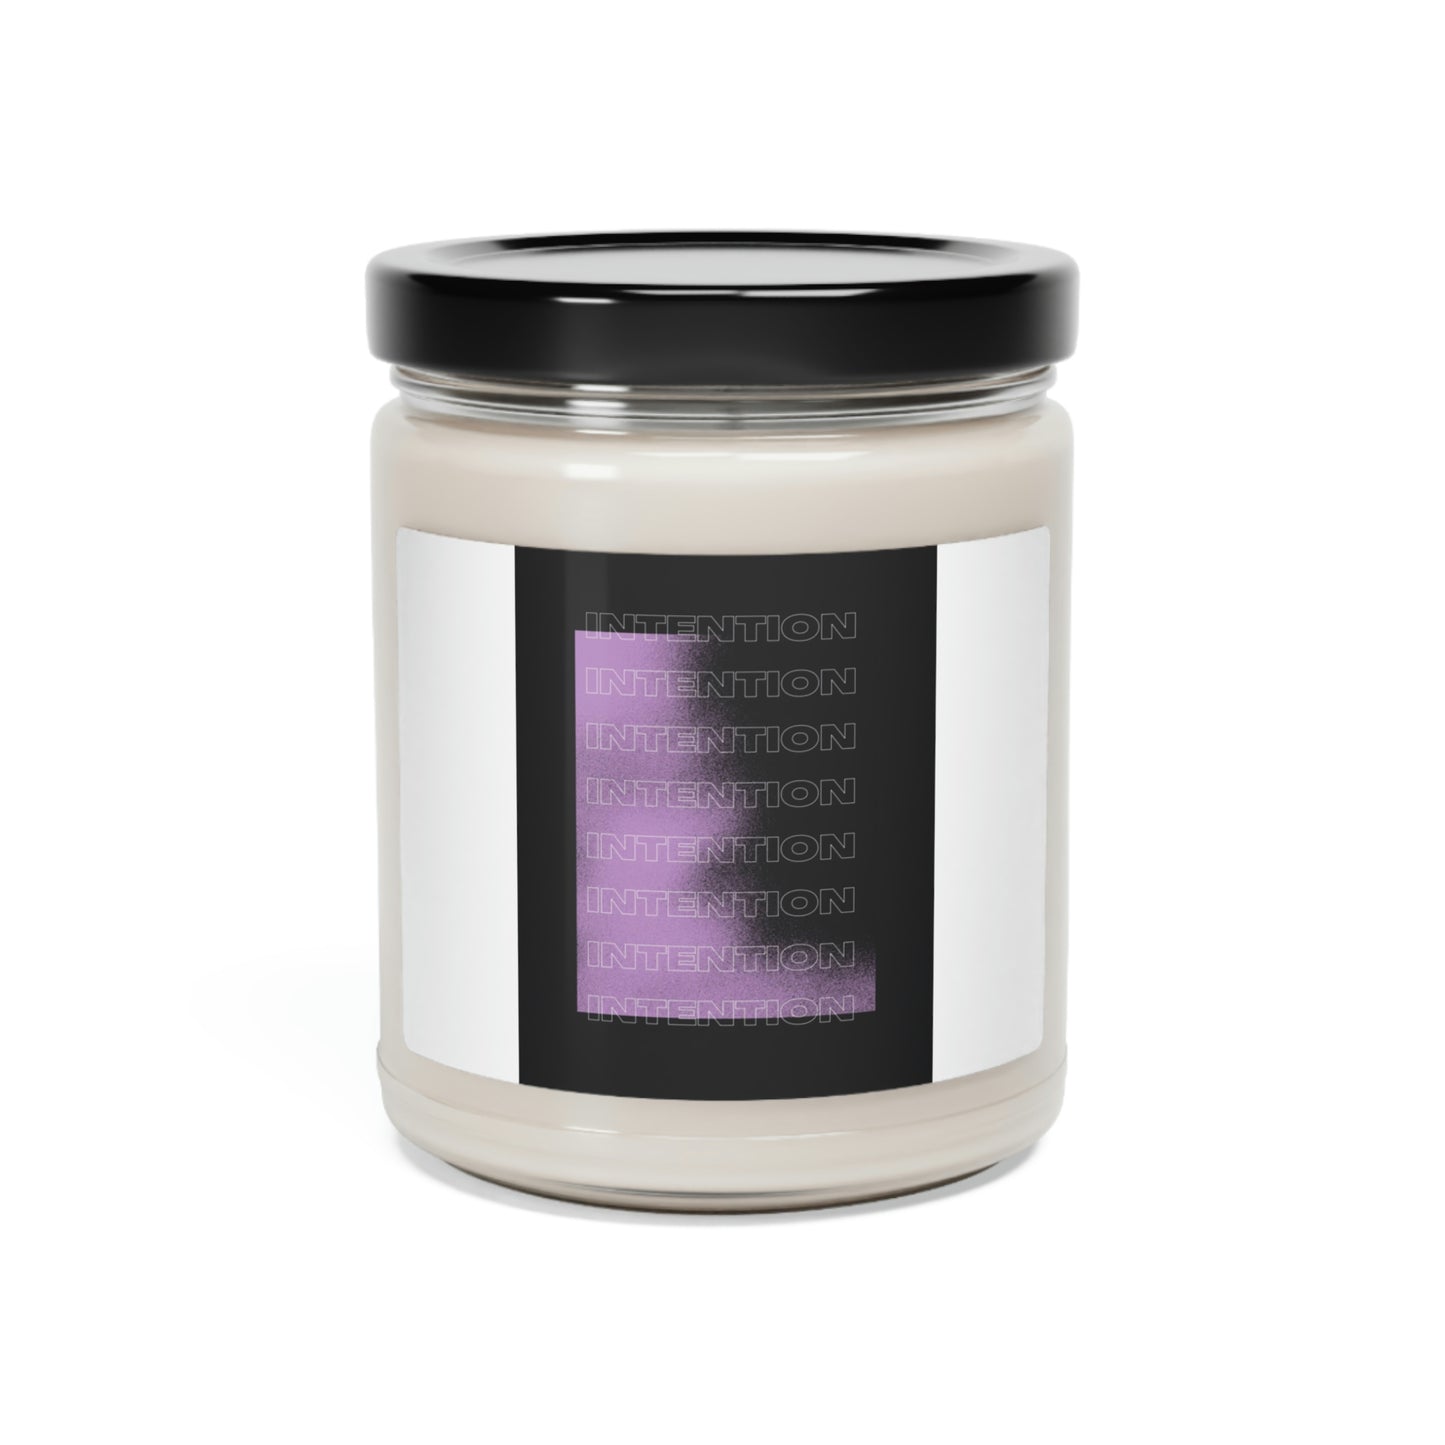 “Intention” Scented Soy Candle, 9oz